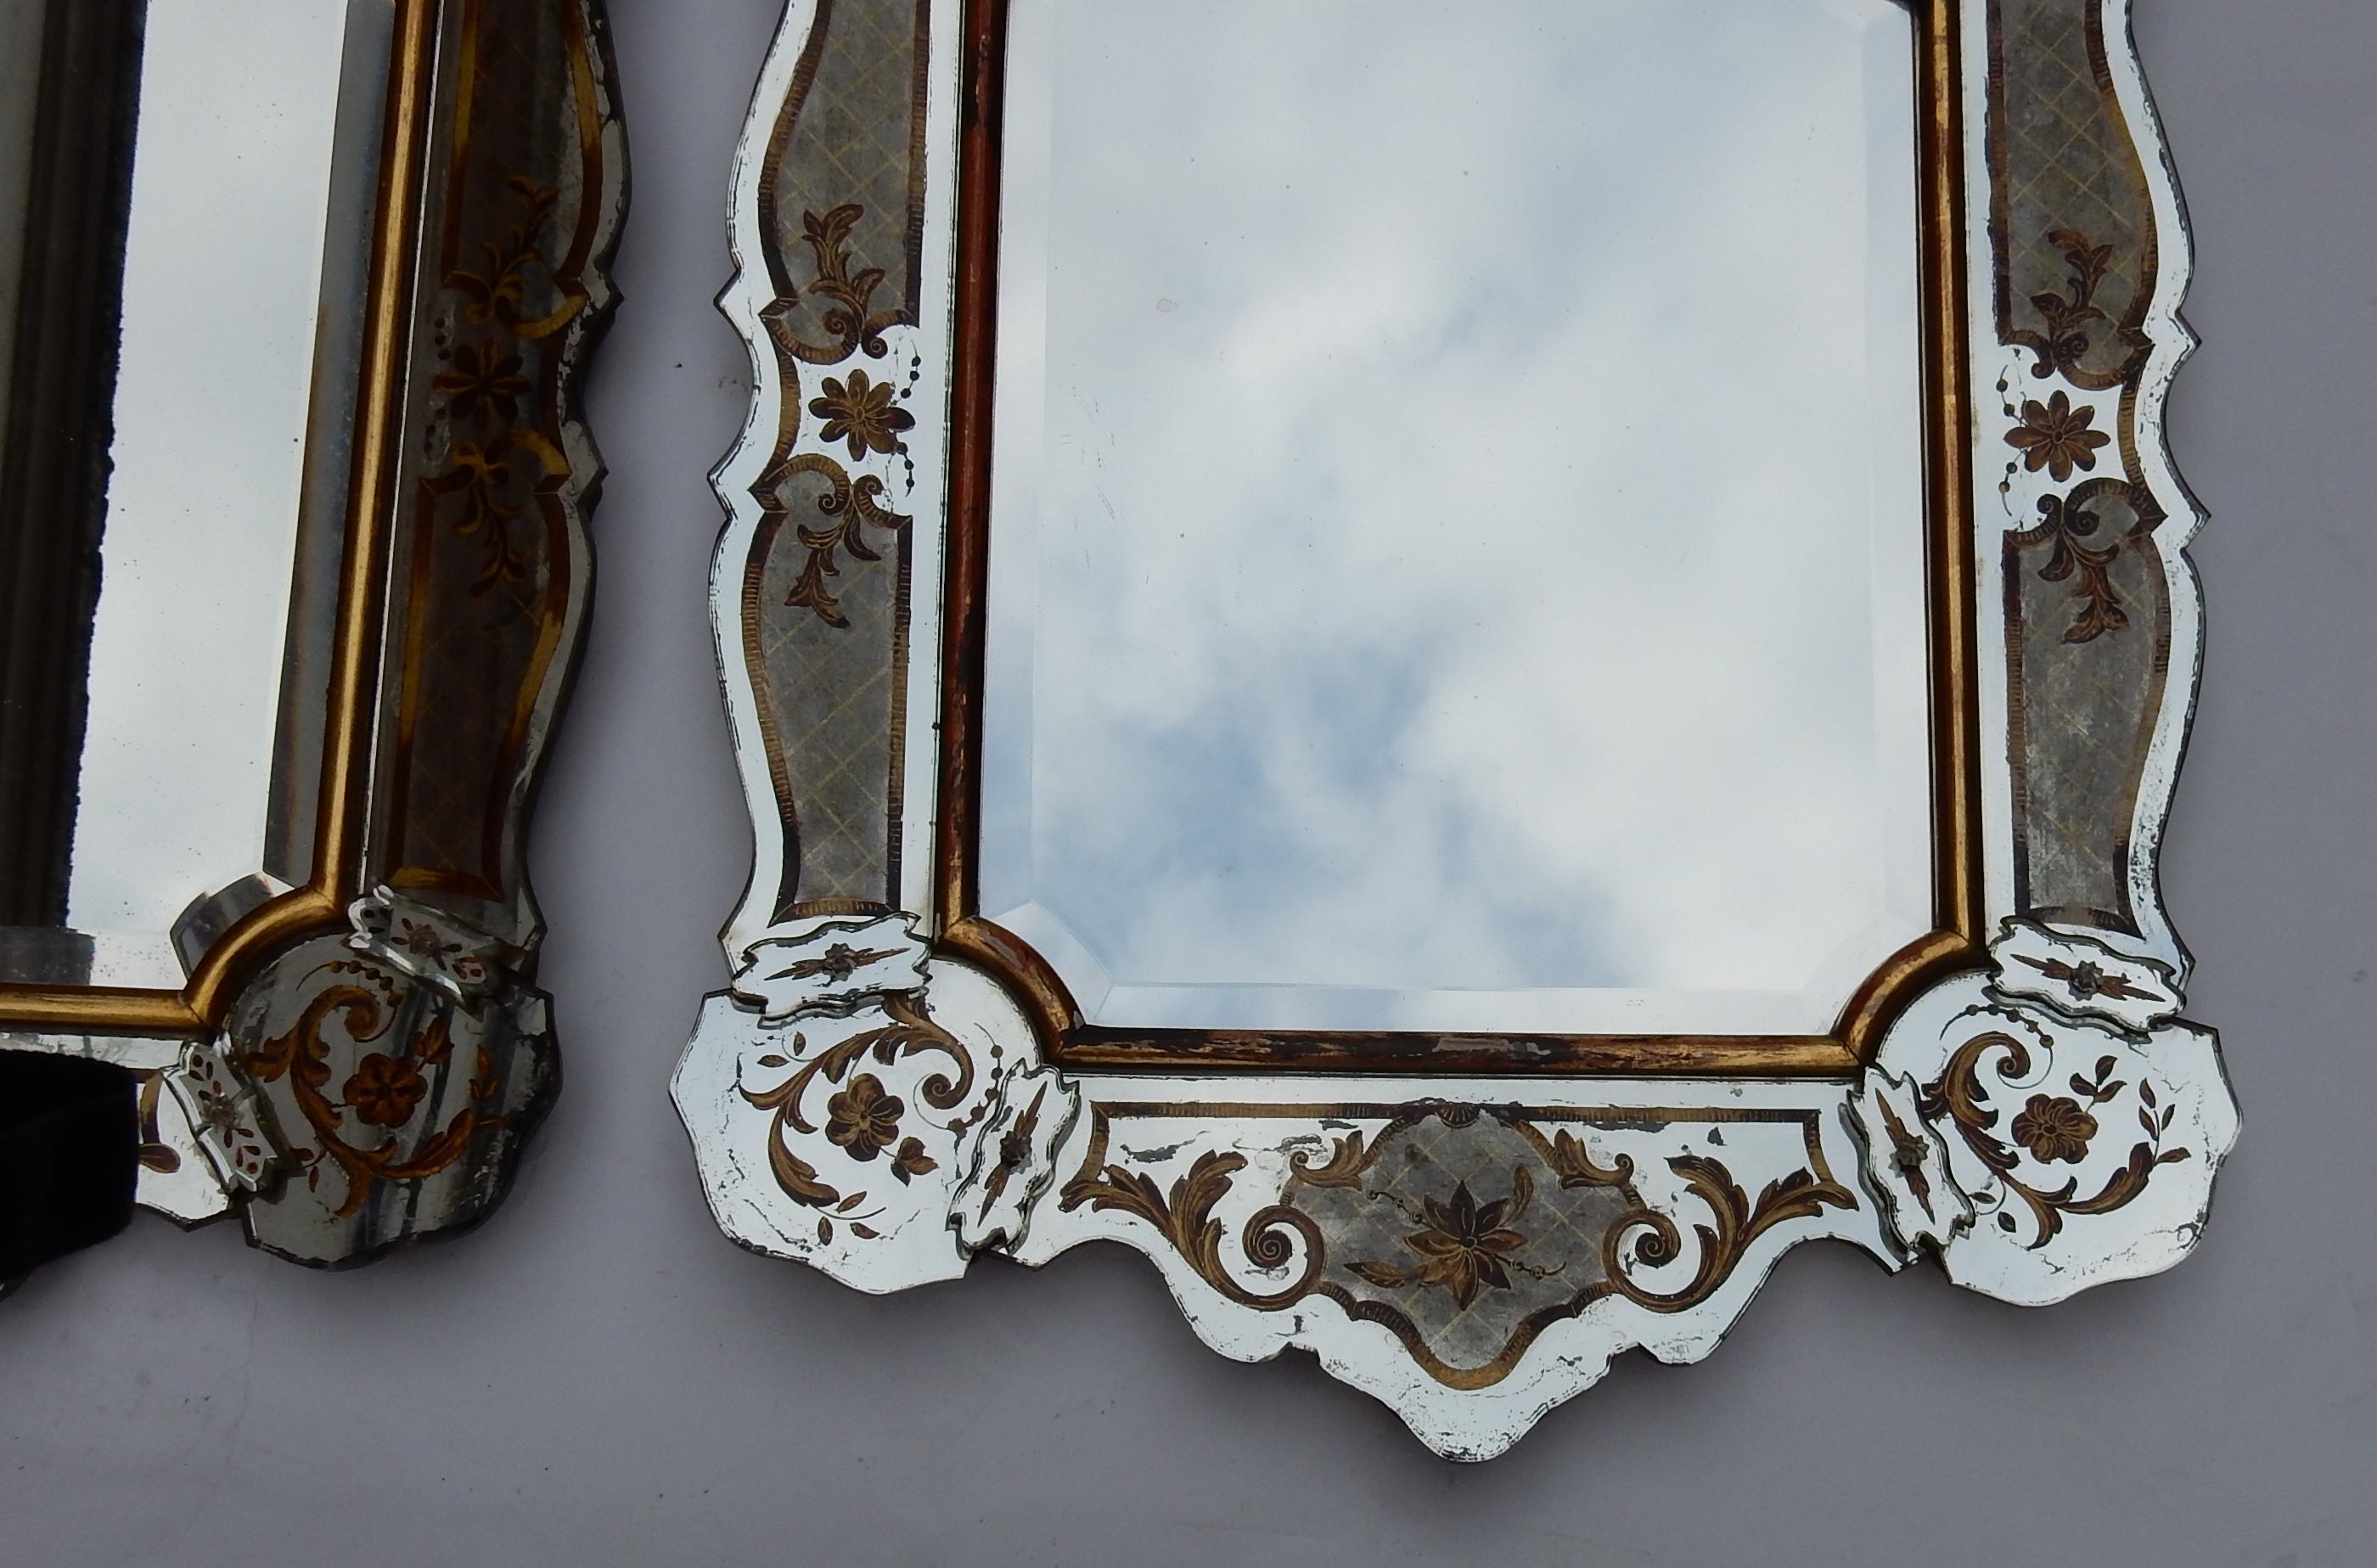 Gilt 1950-1970 Pair of Mirrors with Decors Eglomised